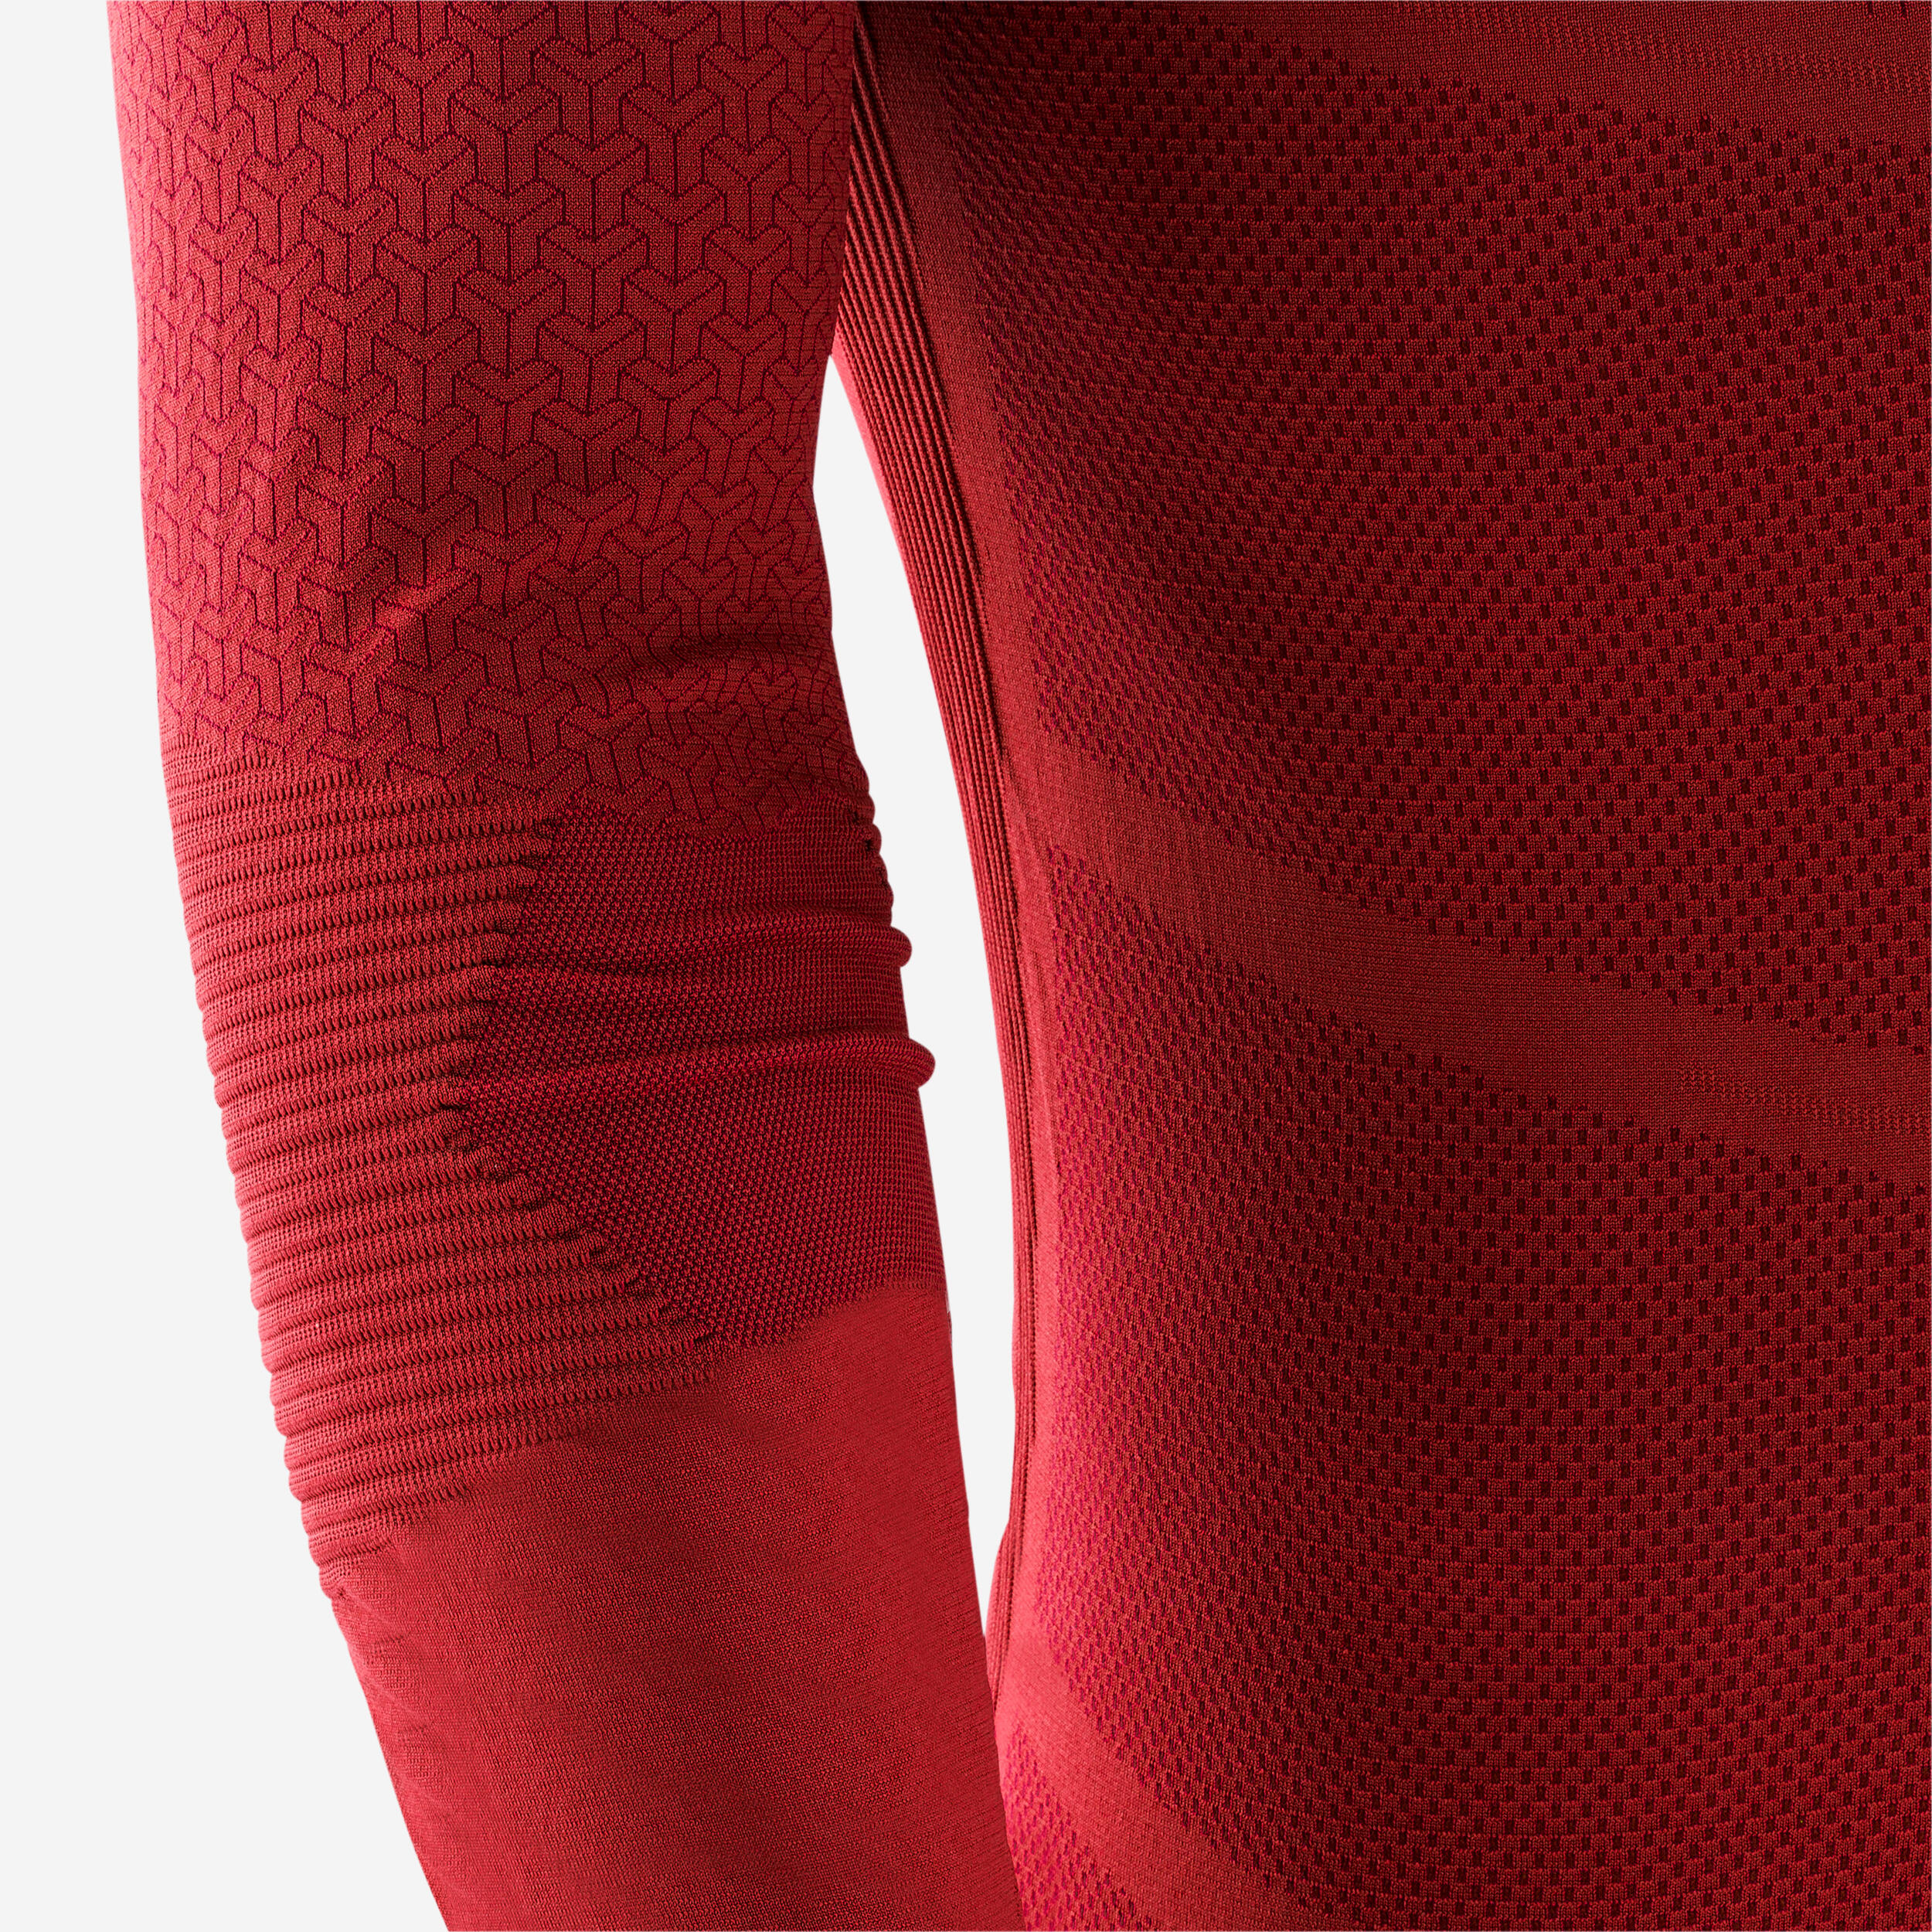 Adult Long-Sleeved Thermal Base Layer Top Keepdry 500 - Red 14/15